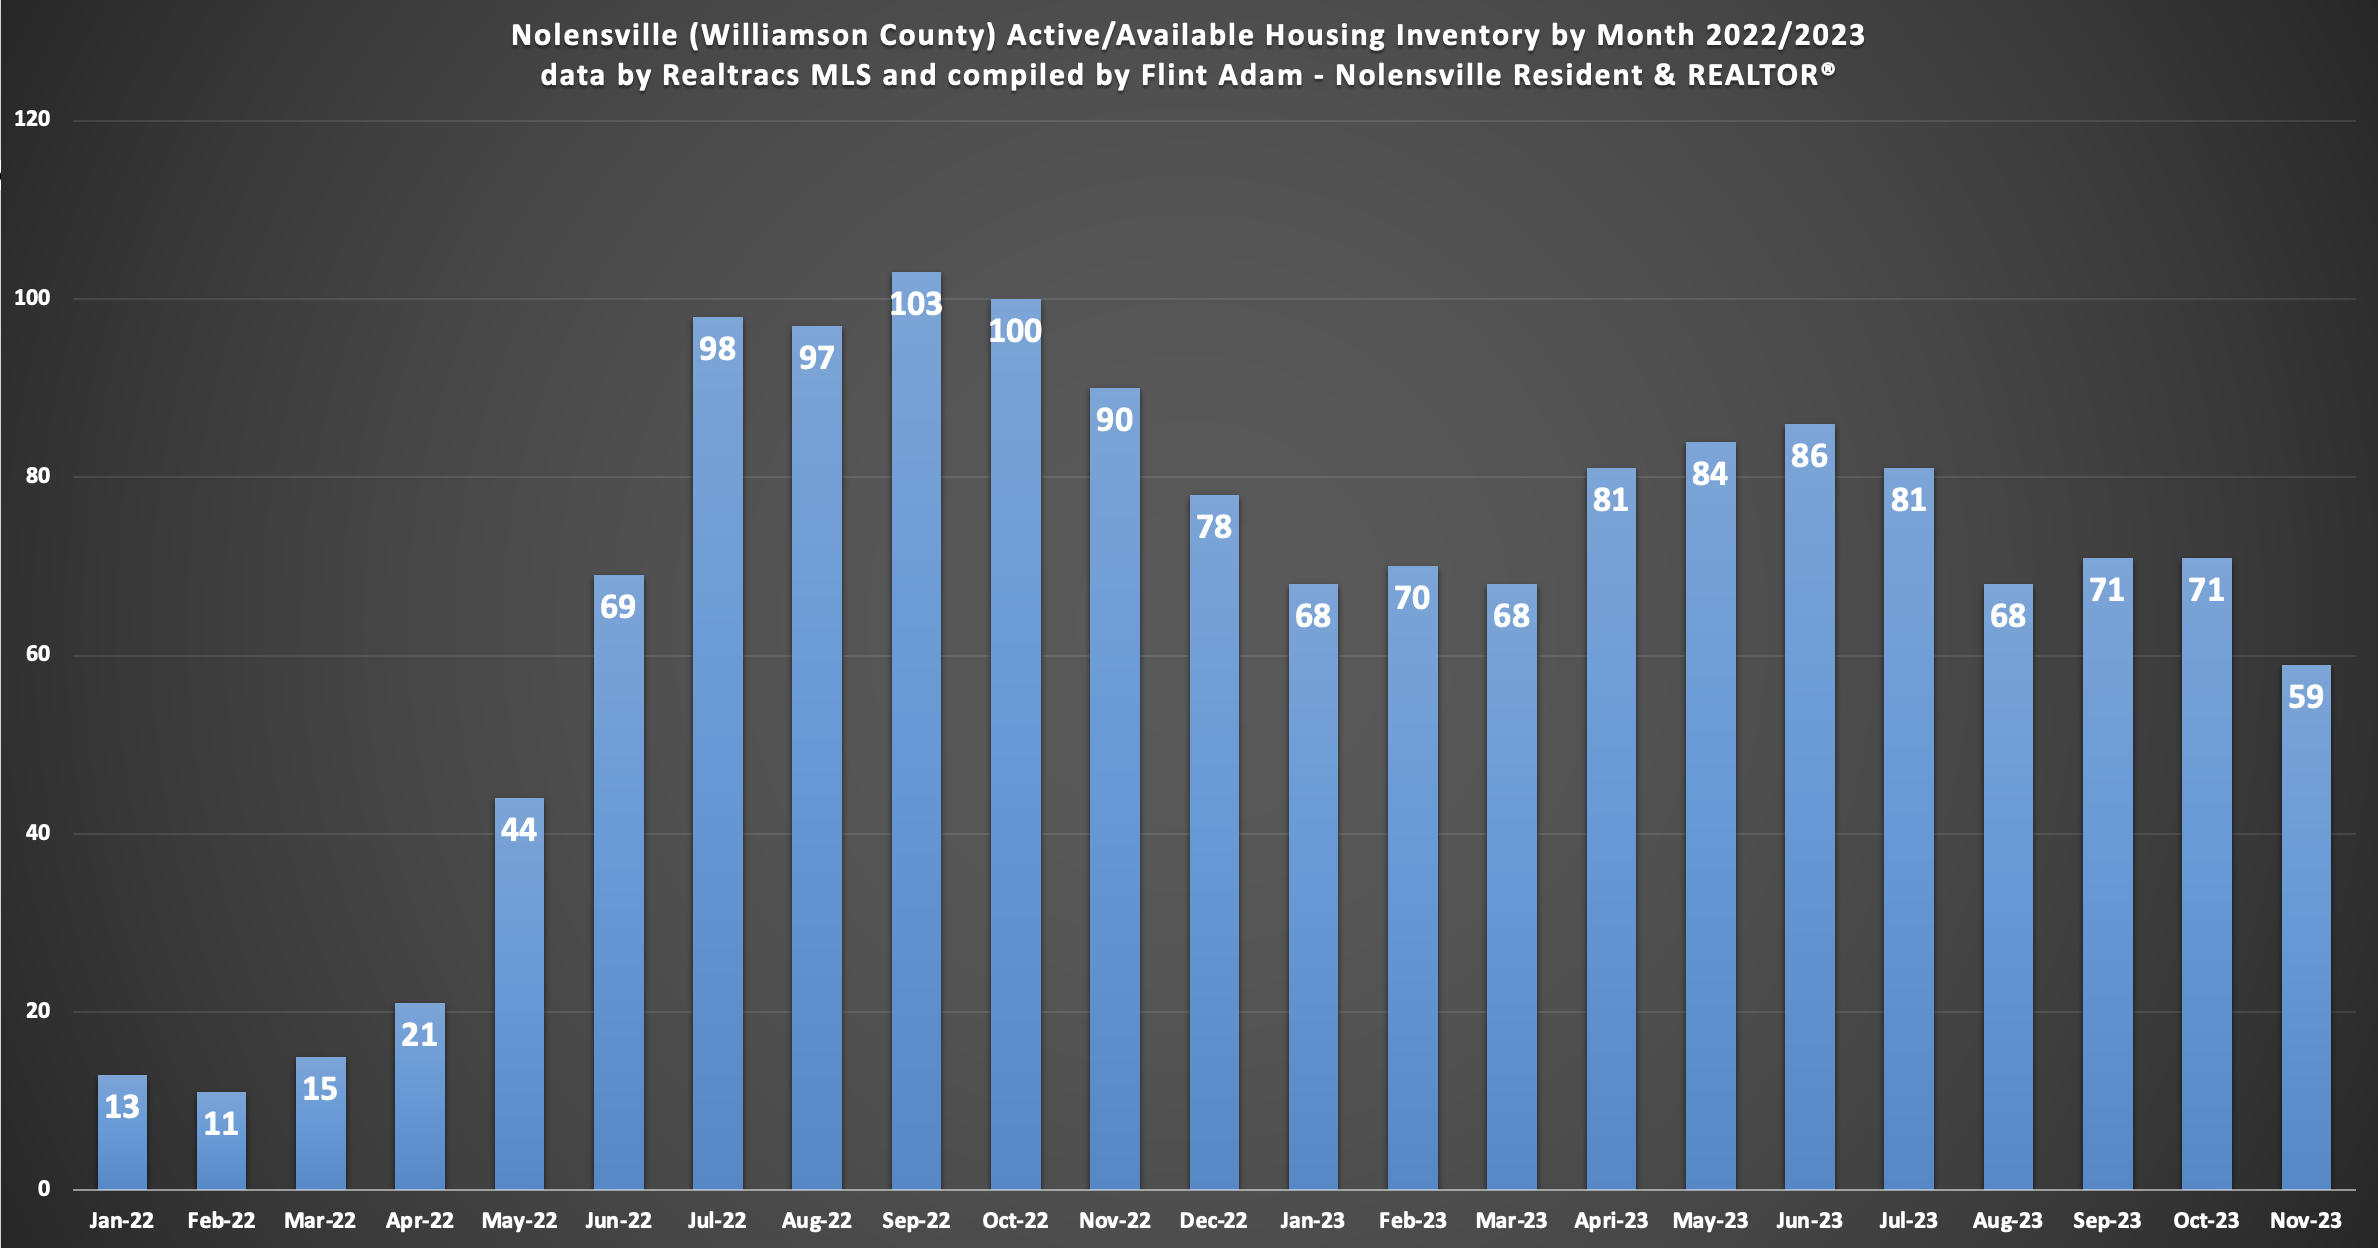 Nolensville (Williamson County) Active/Available Housing Inventory by Month 2022/2023 - data by Realtracs MLS and compiled by Flint Adam, Nolensville Resident & REALTOR